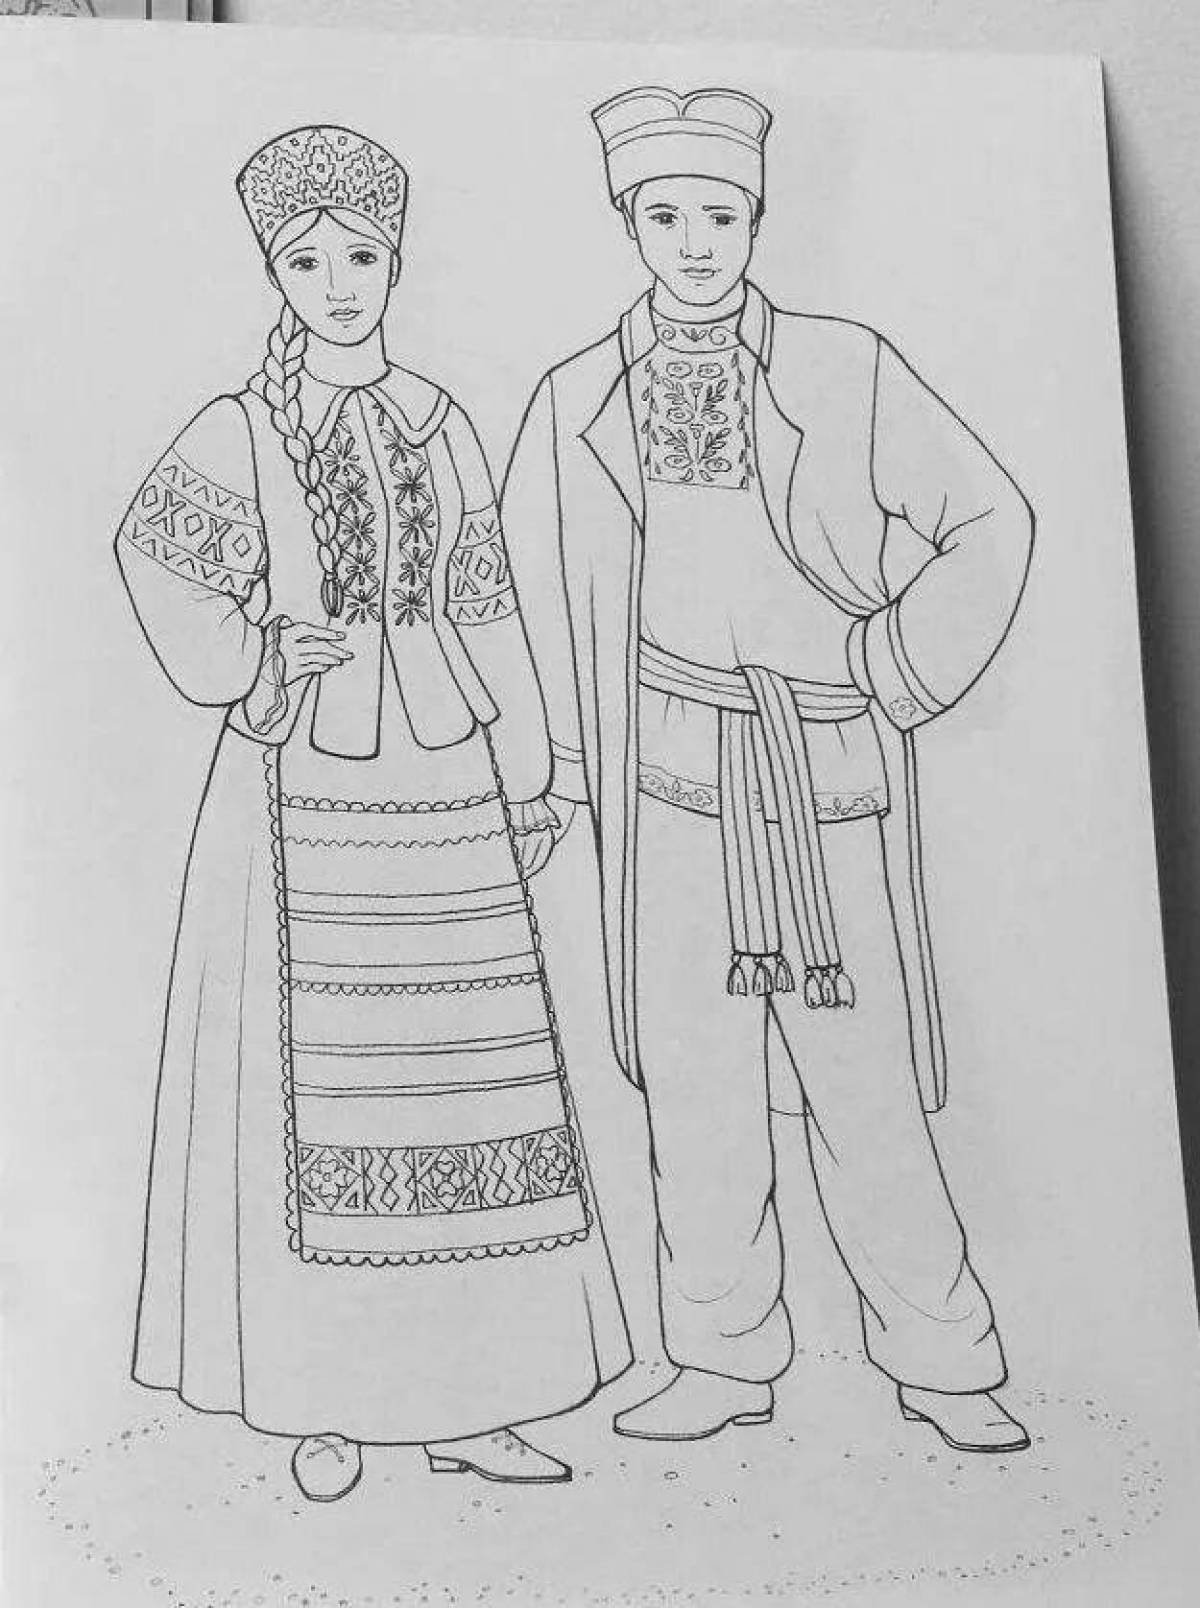 Coloring book of the classic Chuvash national costume